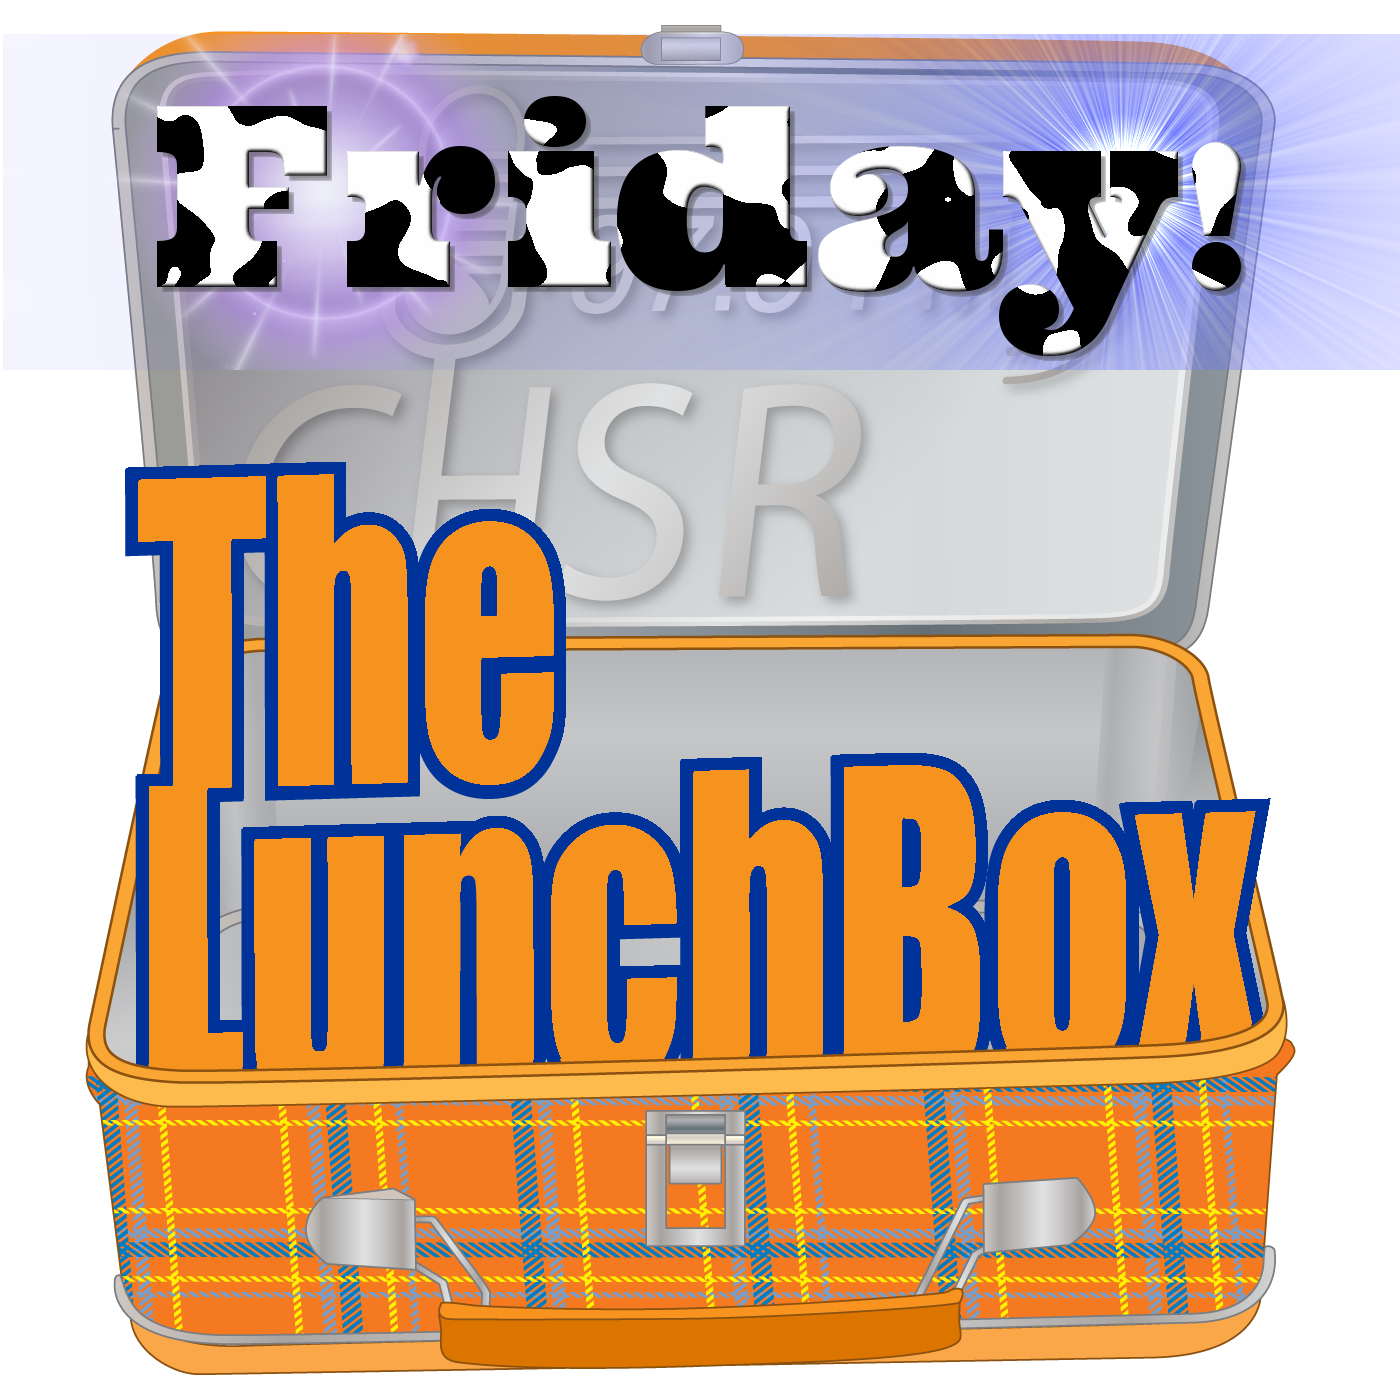 lunchbox clipart mystery bag